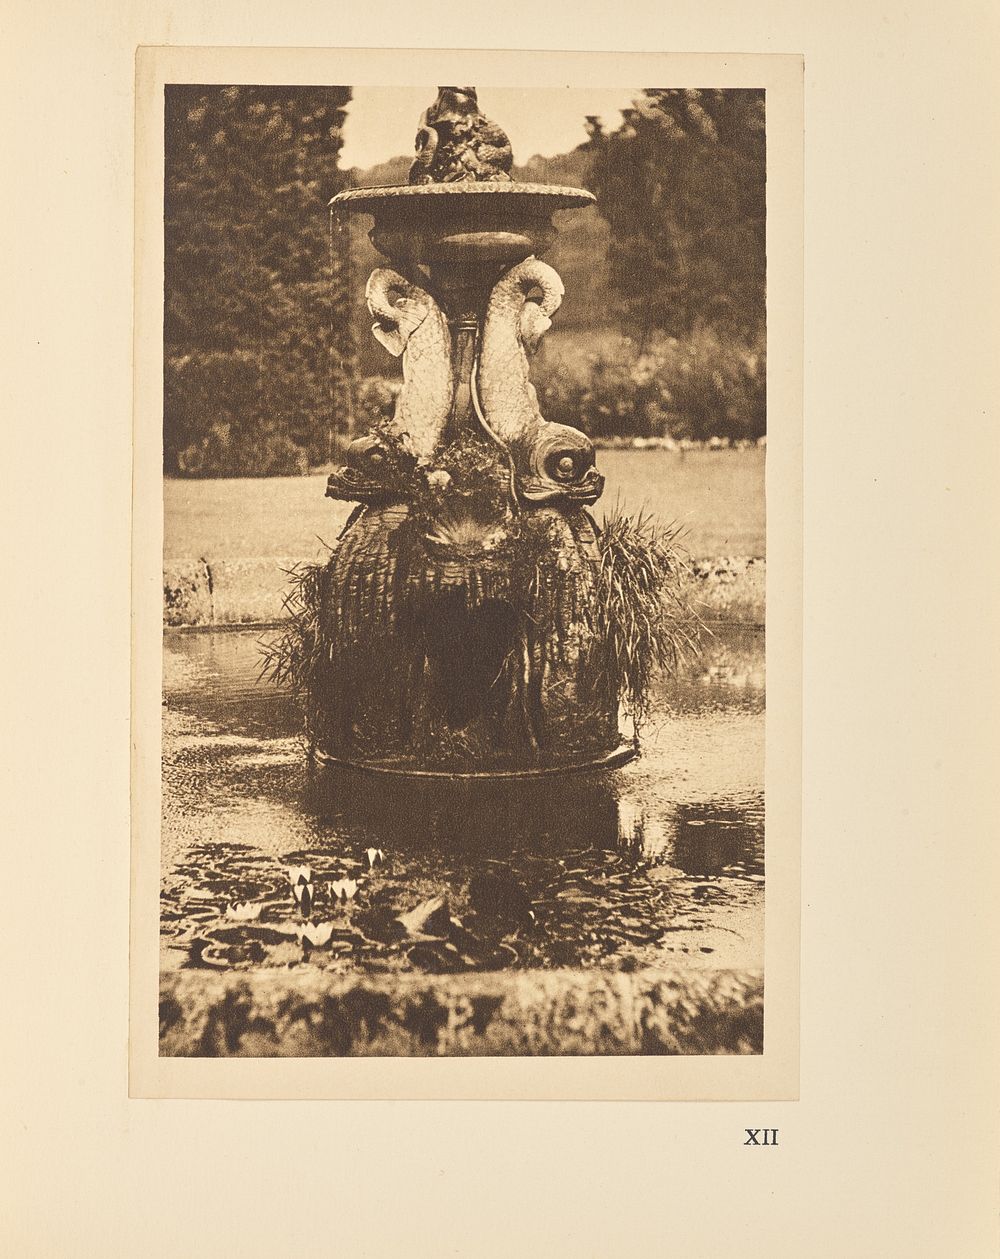 The Dolphin Fountain by Alvin Langdon Coburn